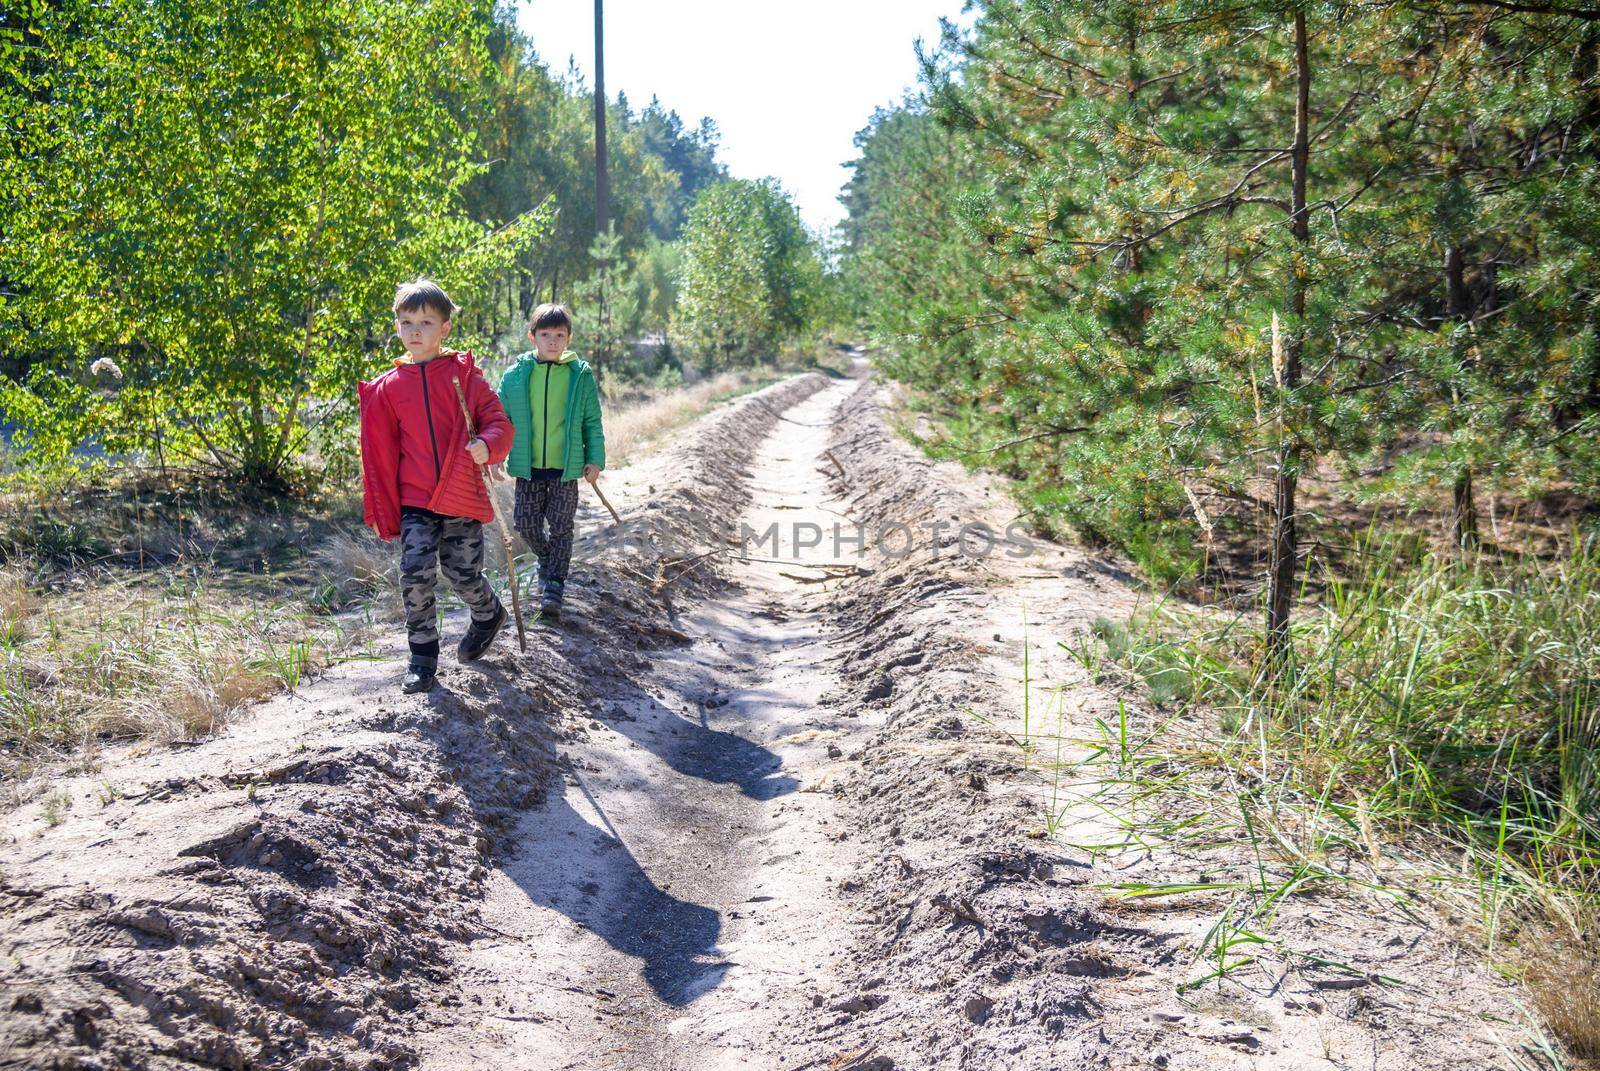 Two preschool children exploring forest, in autumn clothing, pla by Kobysh